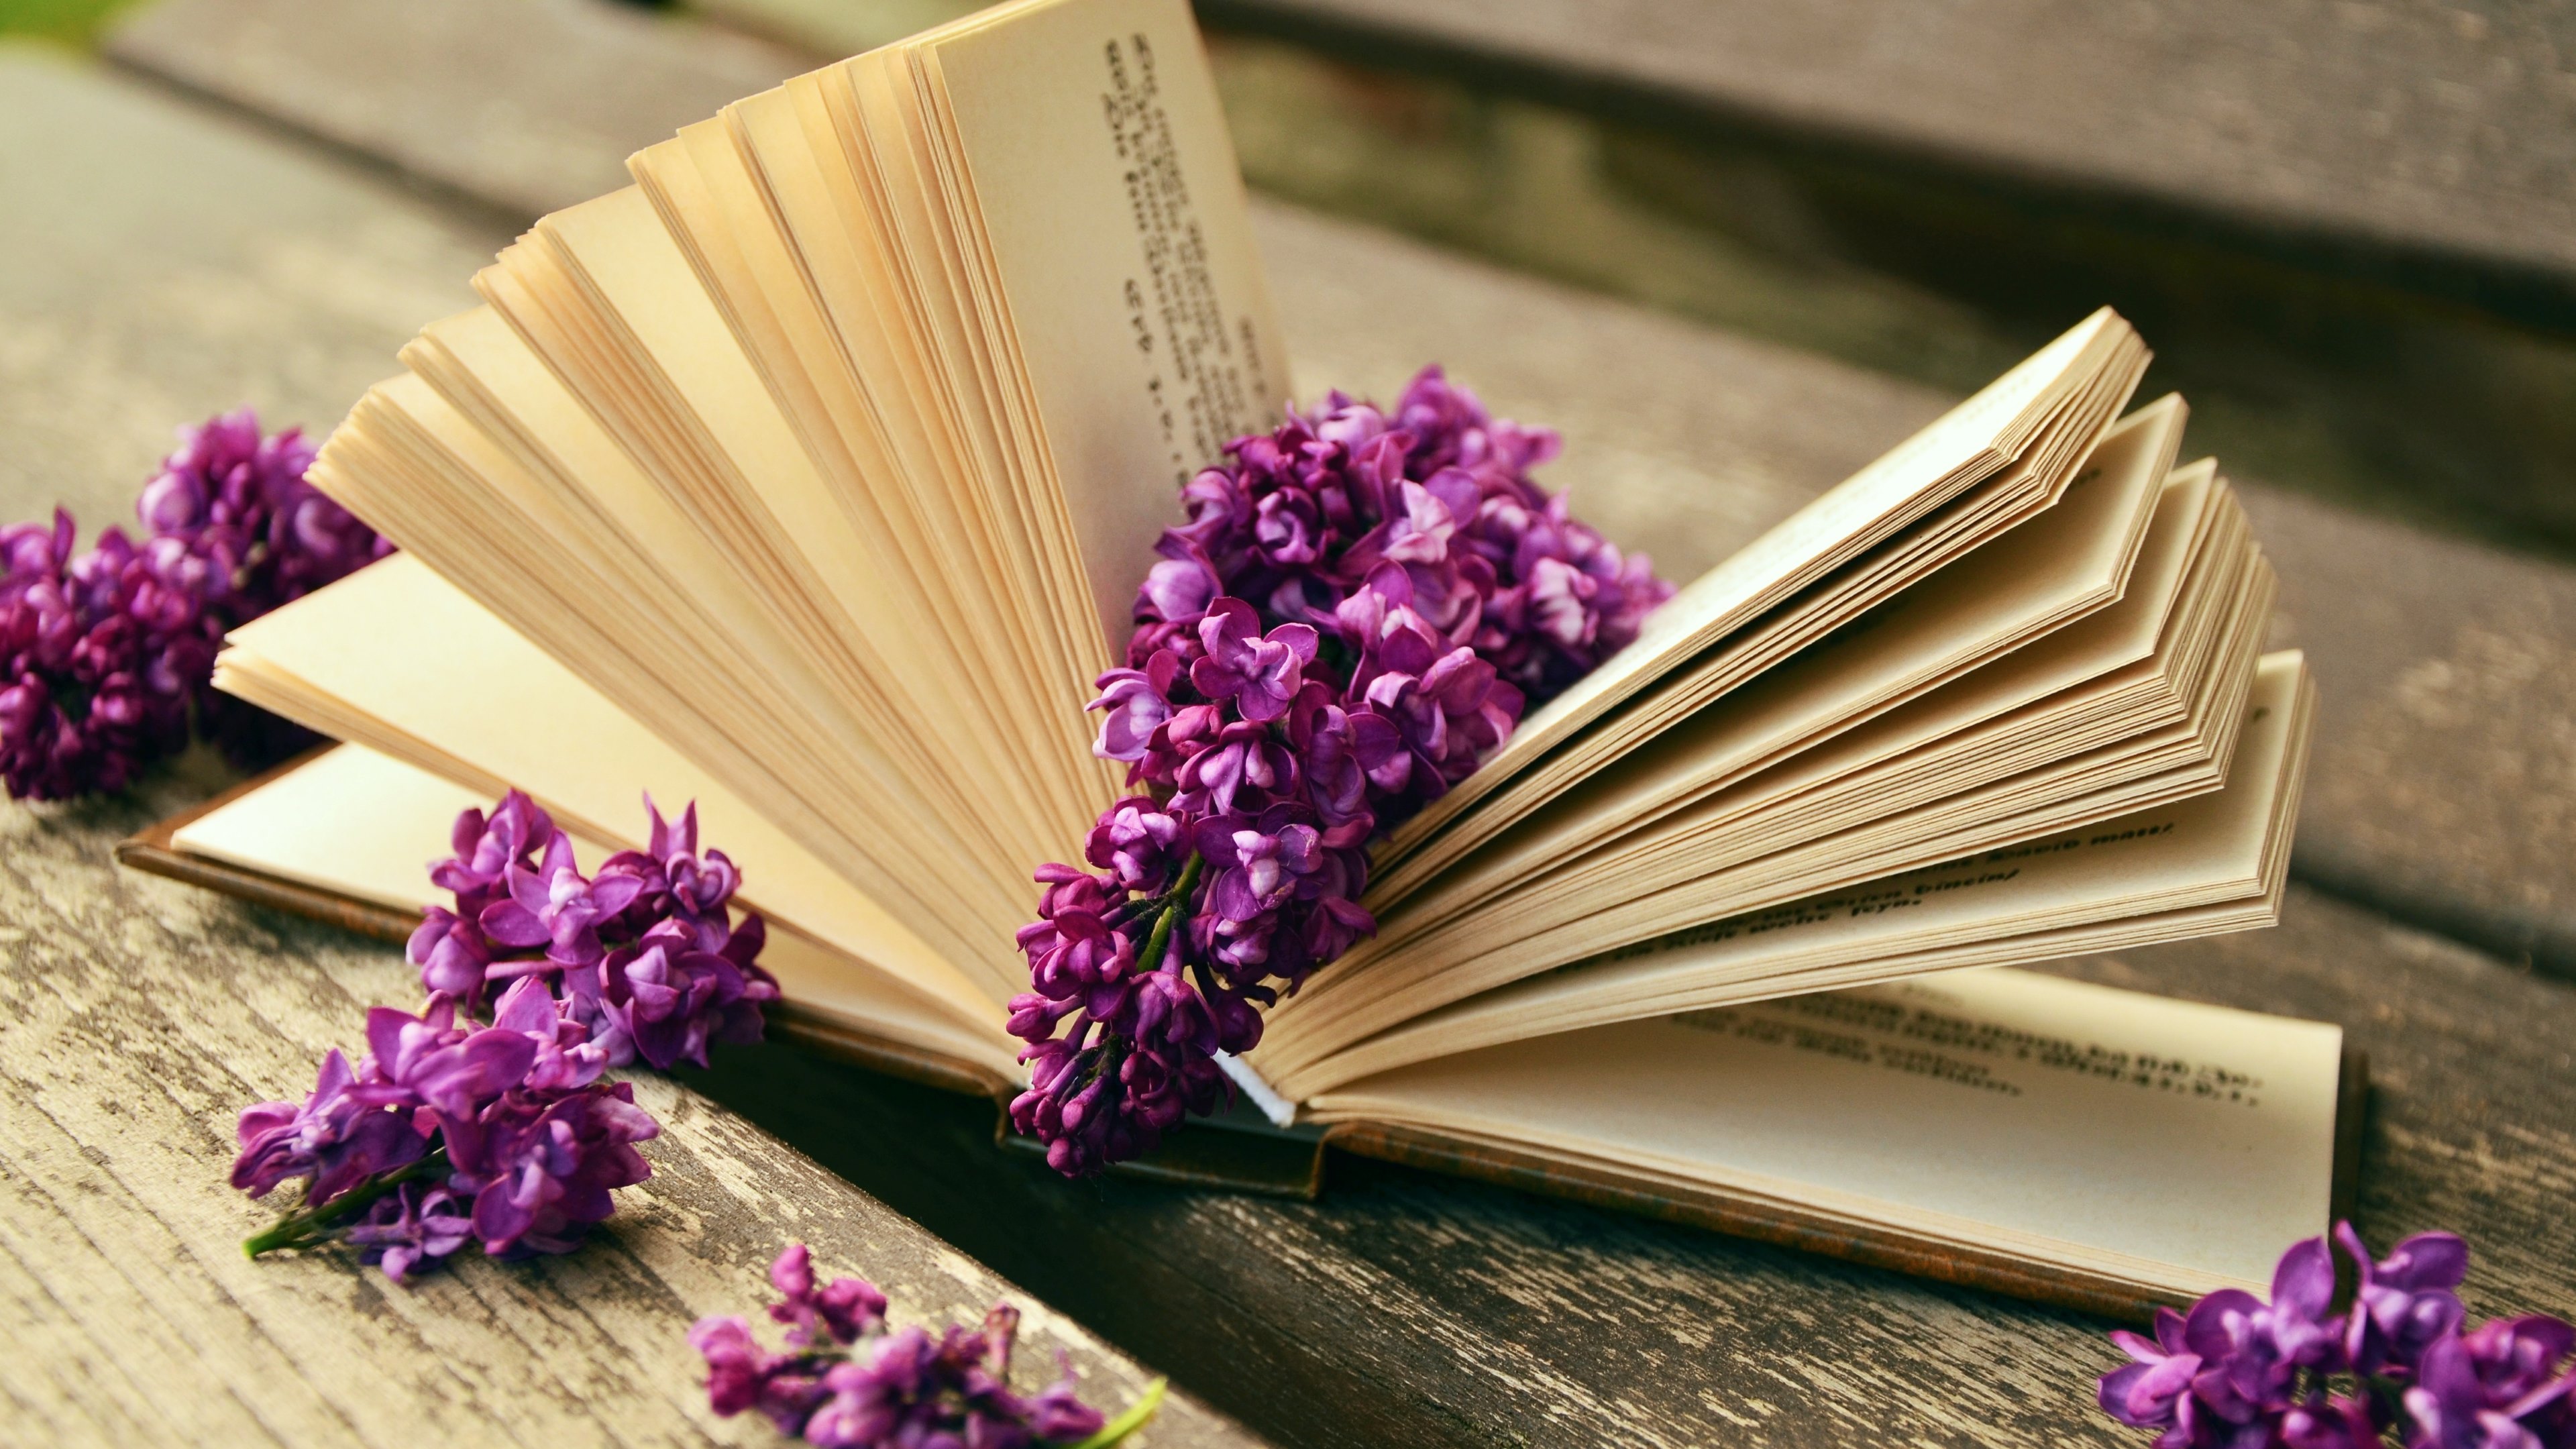 Lilac flowers and a good book 4k Ultra HD Wallpaper. Background